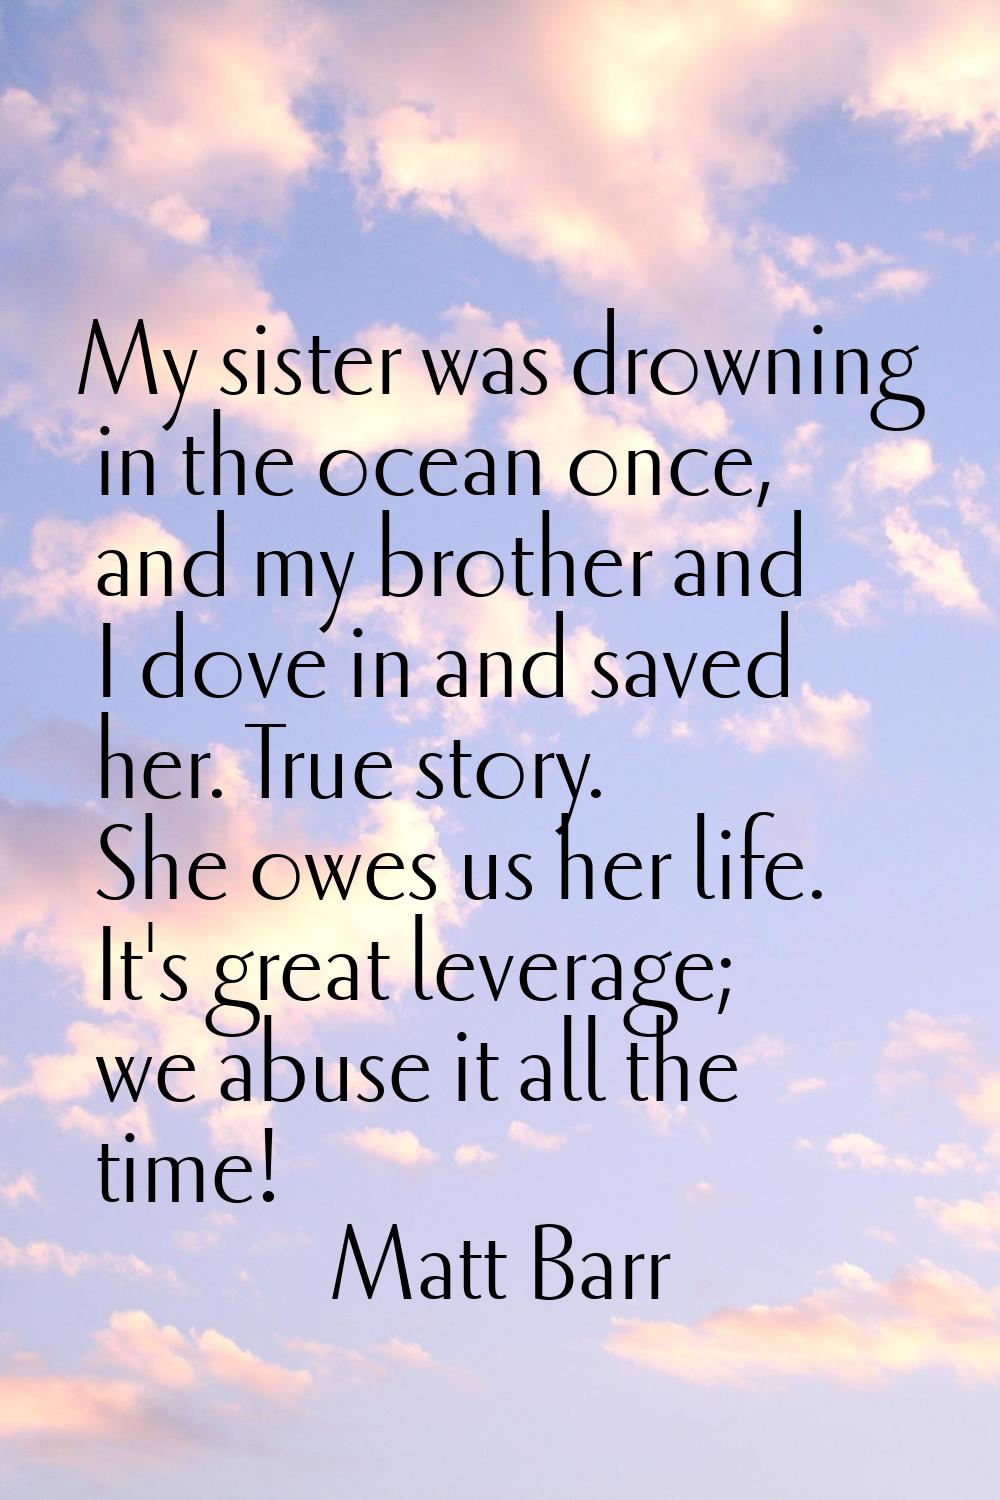 My sister was drowning in the ocean once, and my brother and I dove in and saved her. True story. S